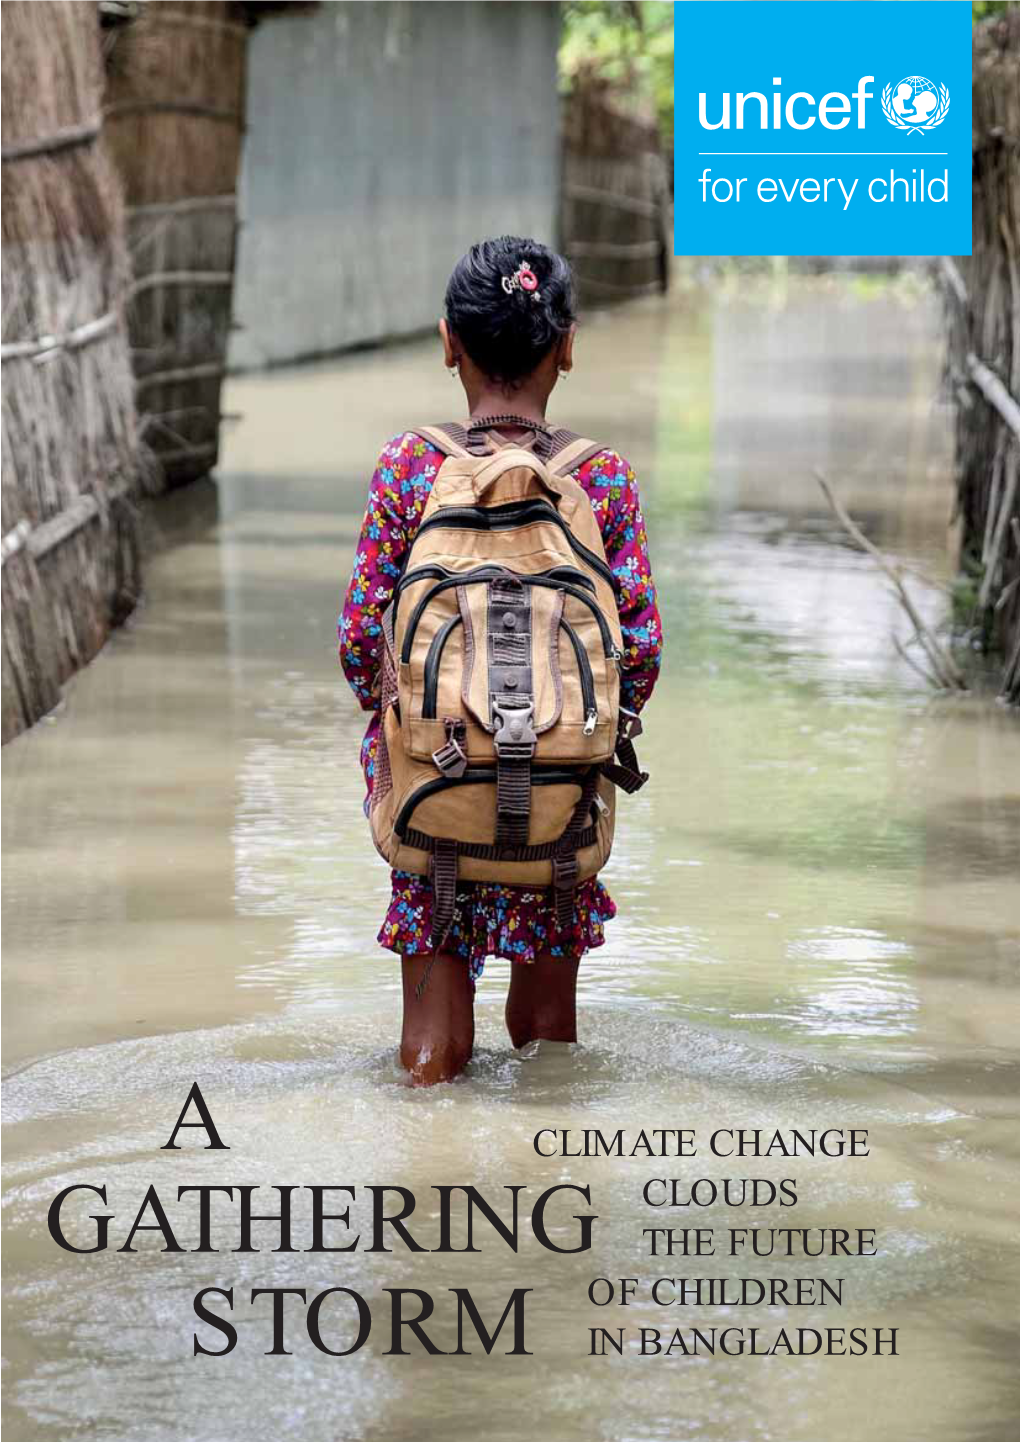 A GATHERING STORM: Climate Change Clouds the Future of Children in Bangladesh